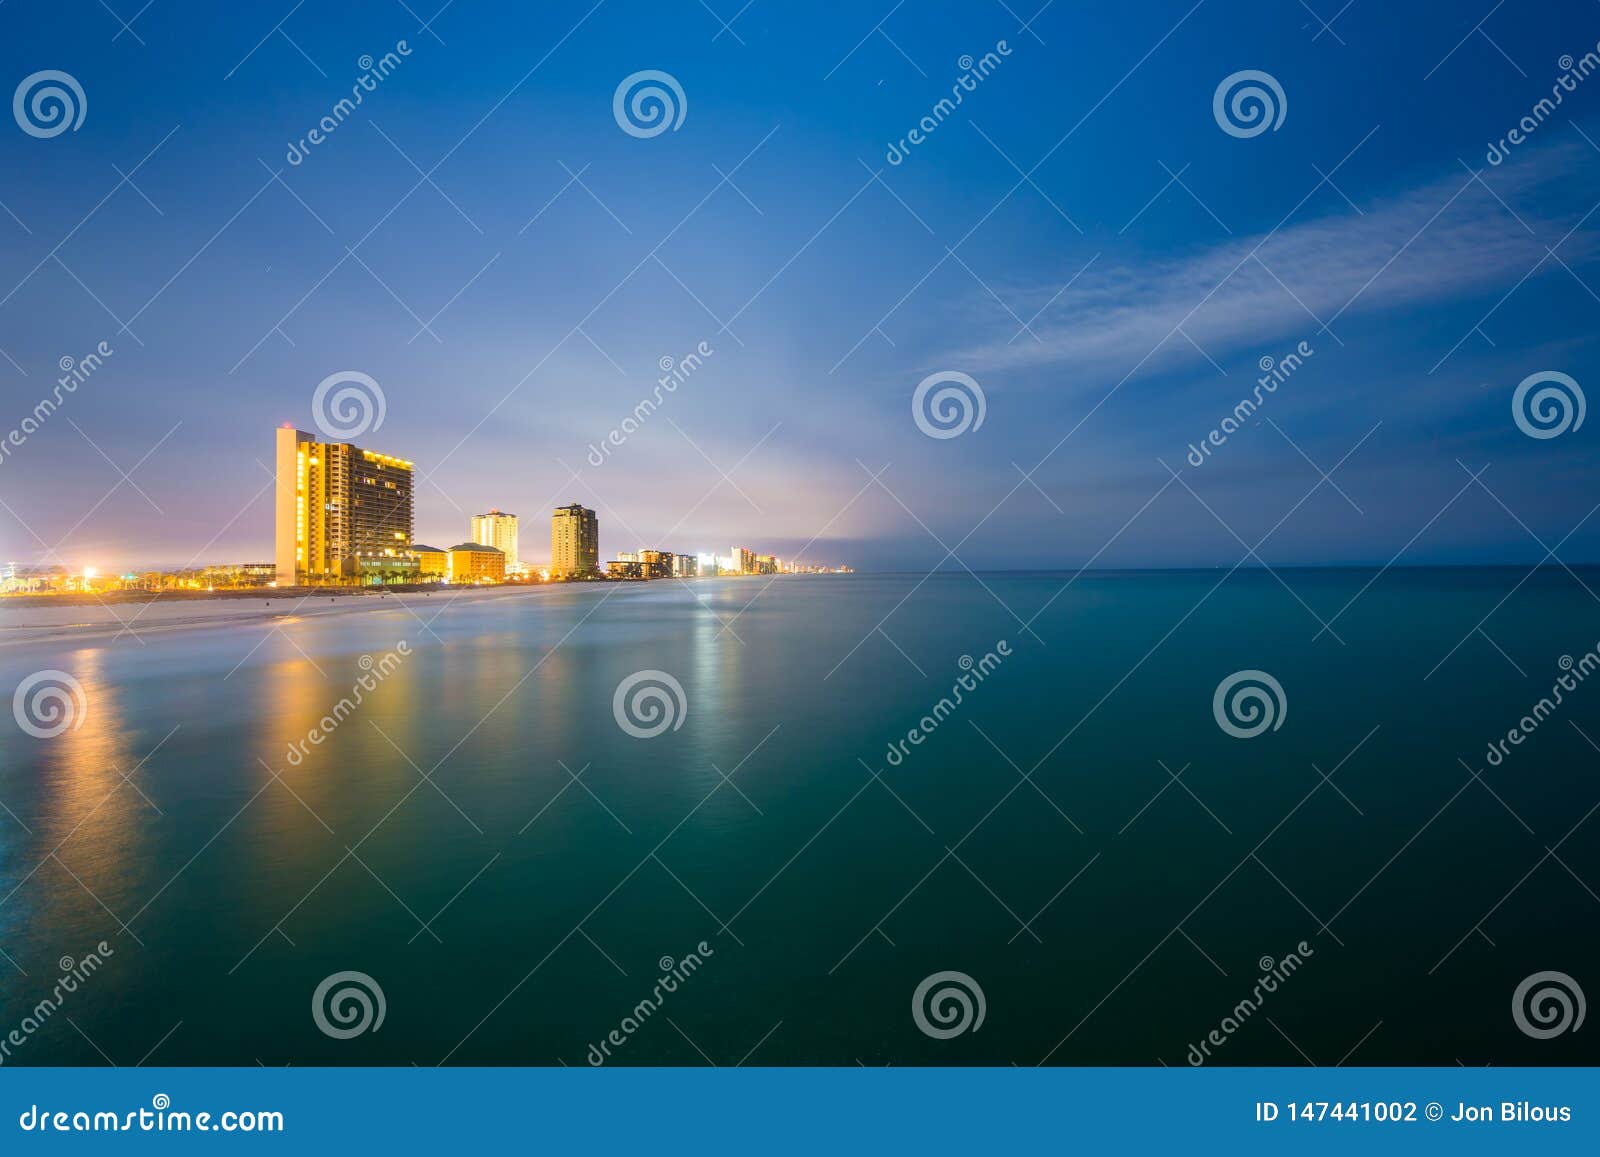 highrises along the gulf of mexico at night, in panama city beach, florida